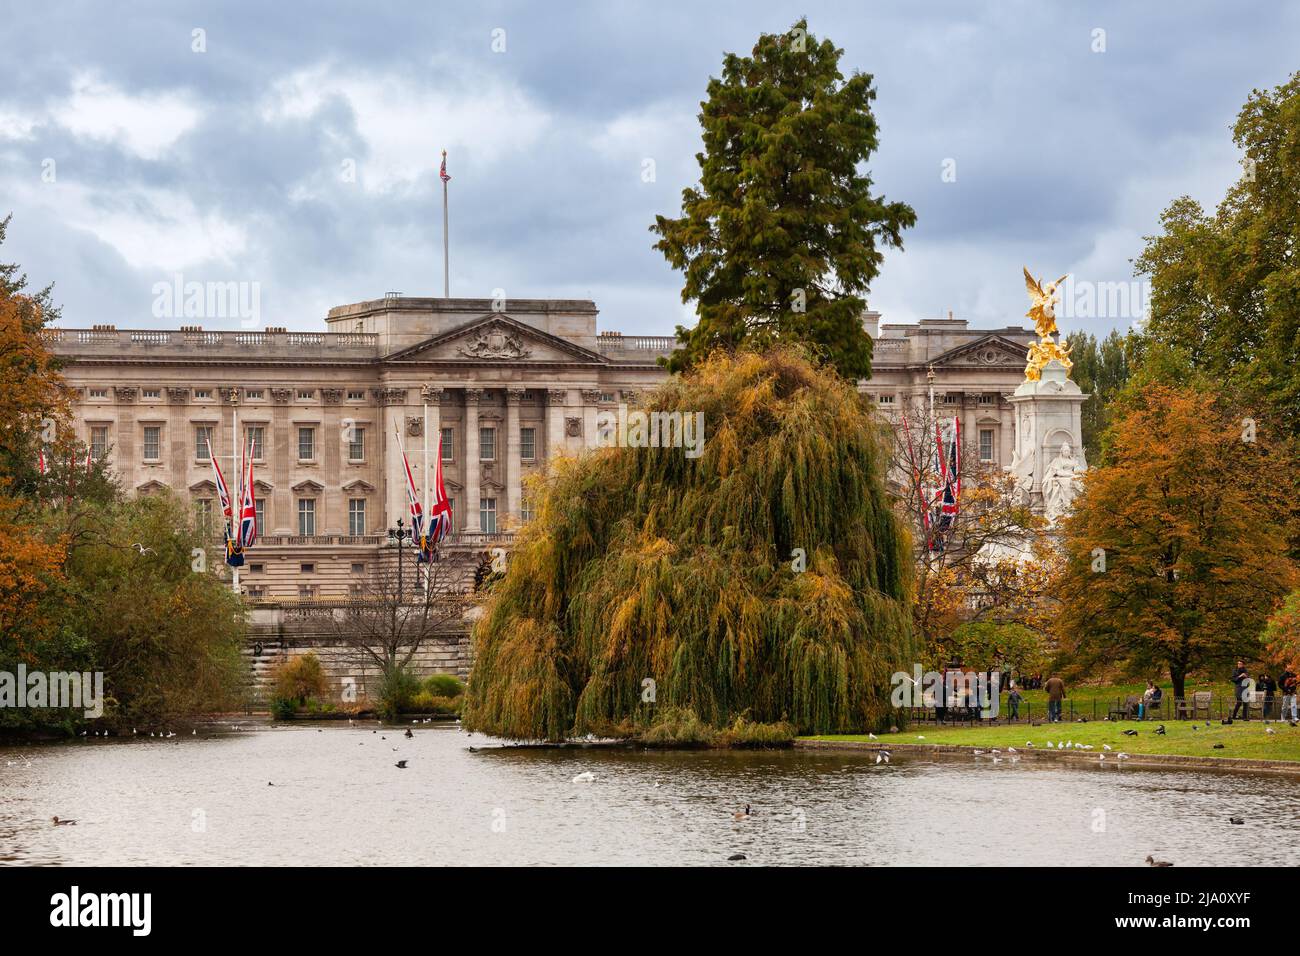 London, UK - Oct 29, 2012: Buckingham Palace and Victoria Memorial as seen from the St James's Park Stock Photo